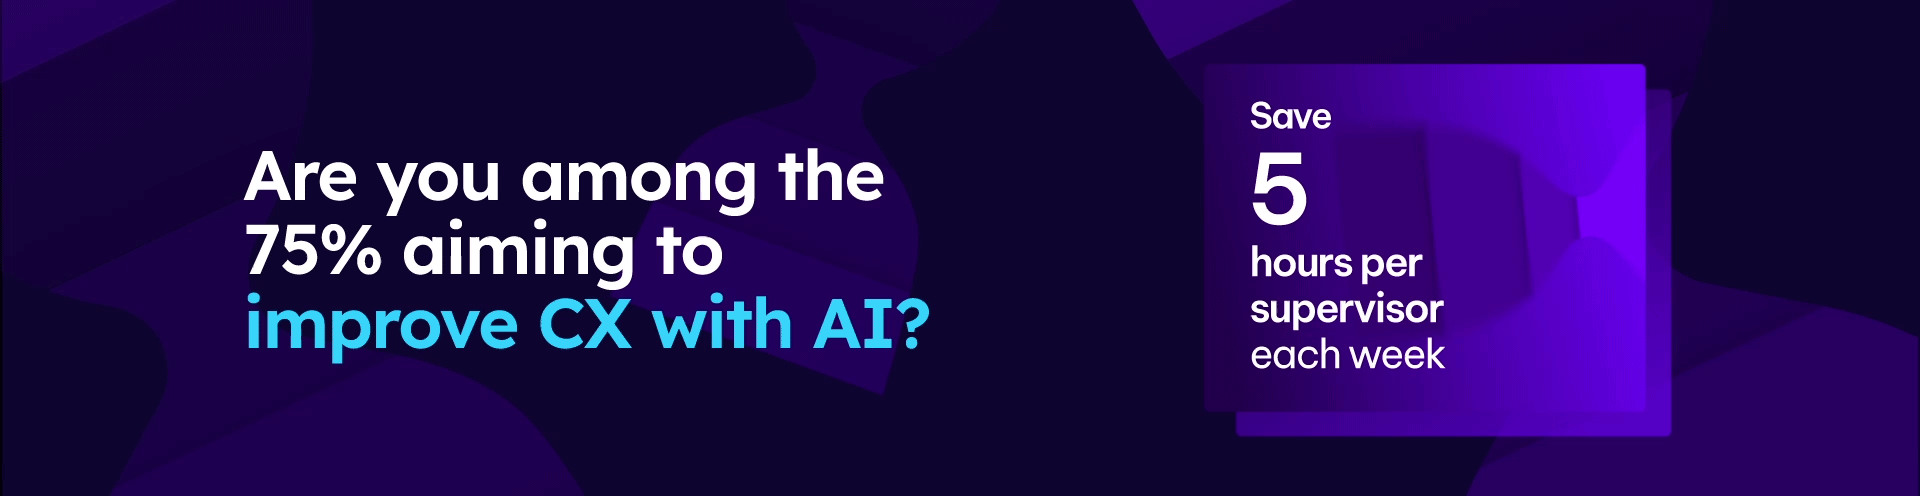 Are you among the 75% aiming to improve CX with AI? 